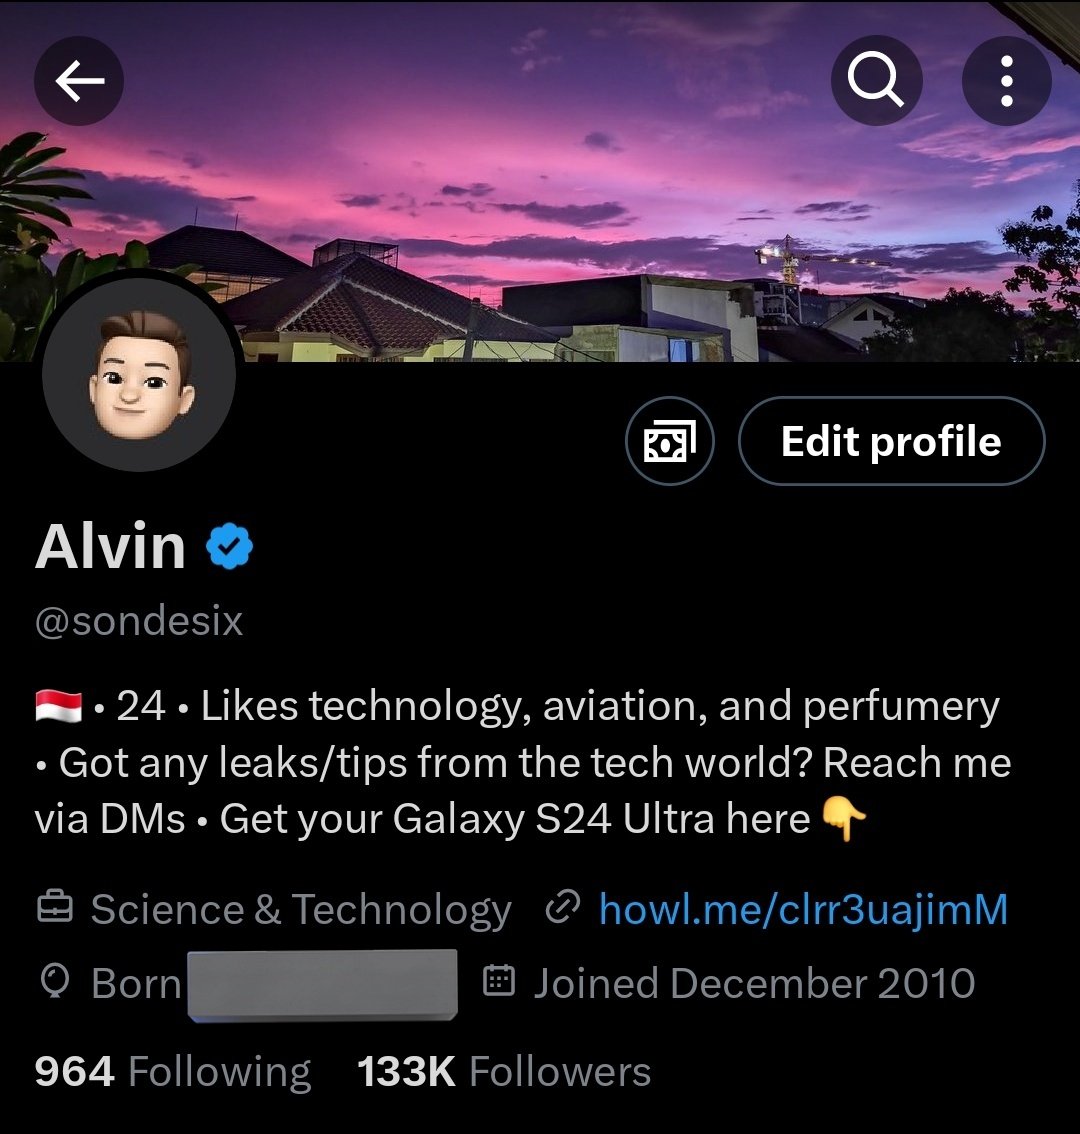 Found an old screenshot of my X (Twitter) profile that I took almost 4 years ago, which was on September 26, 2020. Damn. Time flies.